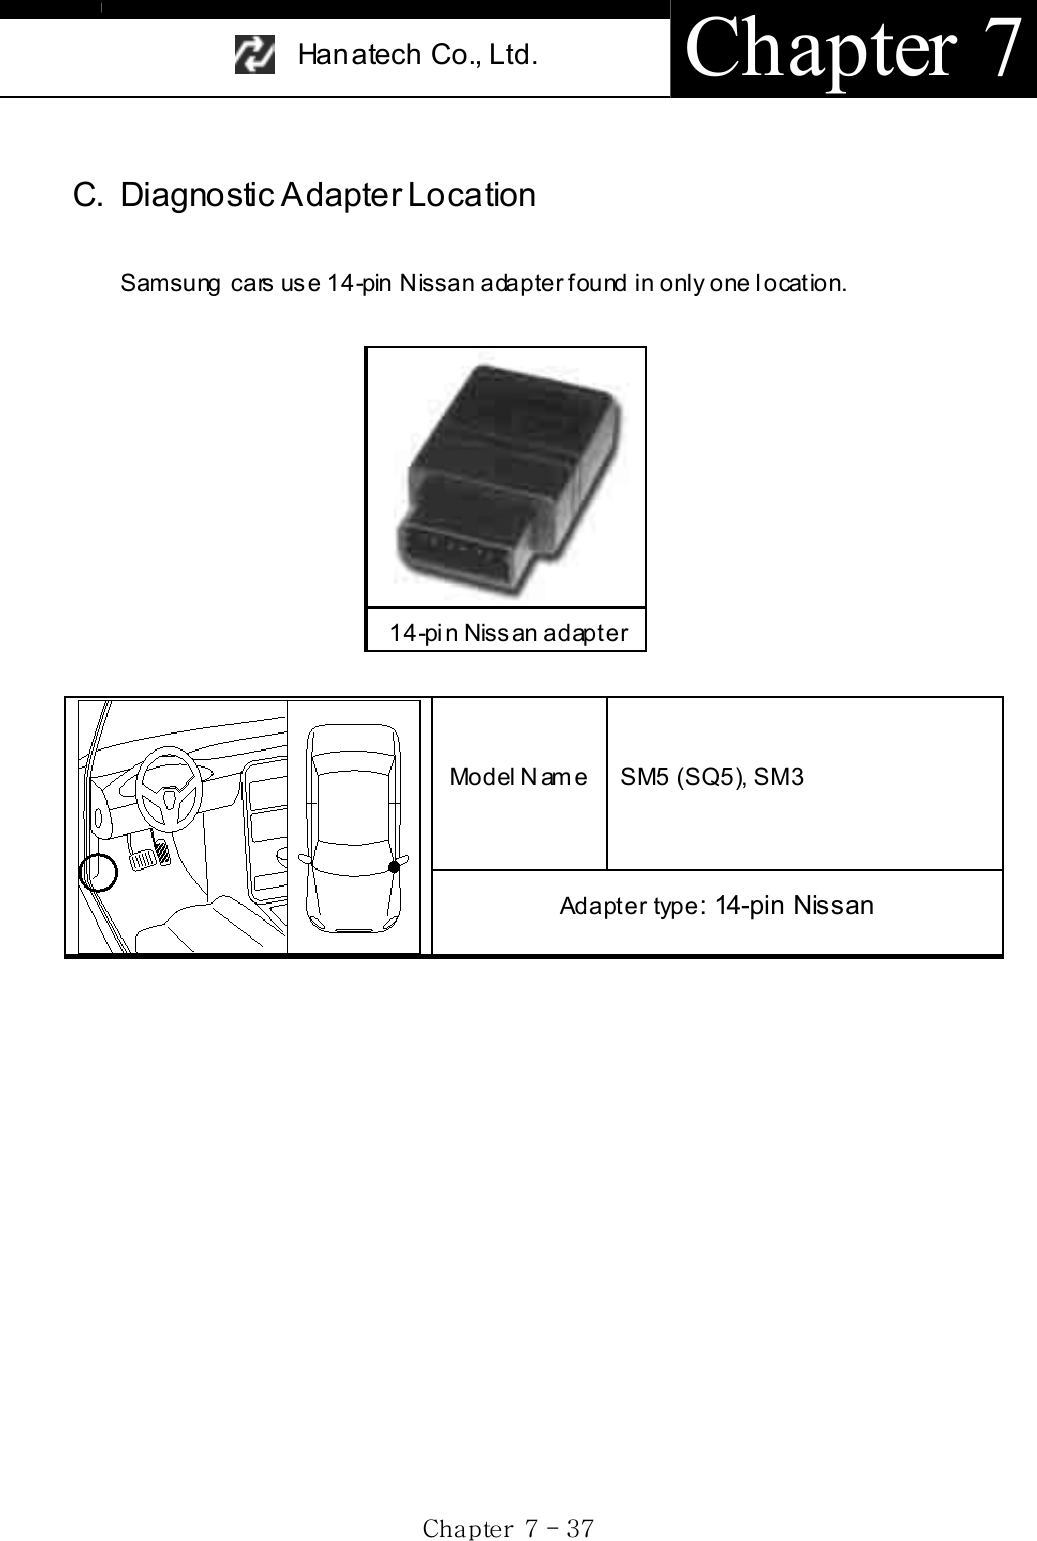 Han atech Co., Ltd.  Chapter 7 Gj  G^G TGZ^GC. Diagnostic Adapter Location Samsung cars use 14-pin Nissan adapter found in only one location. 14-pin Nissan adapter Model Name  SM5 (SQ5), SM3 Adapter type: 14-pin Nissan 